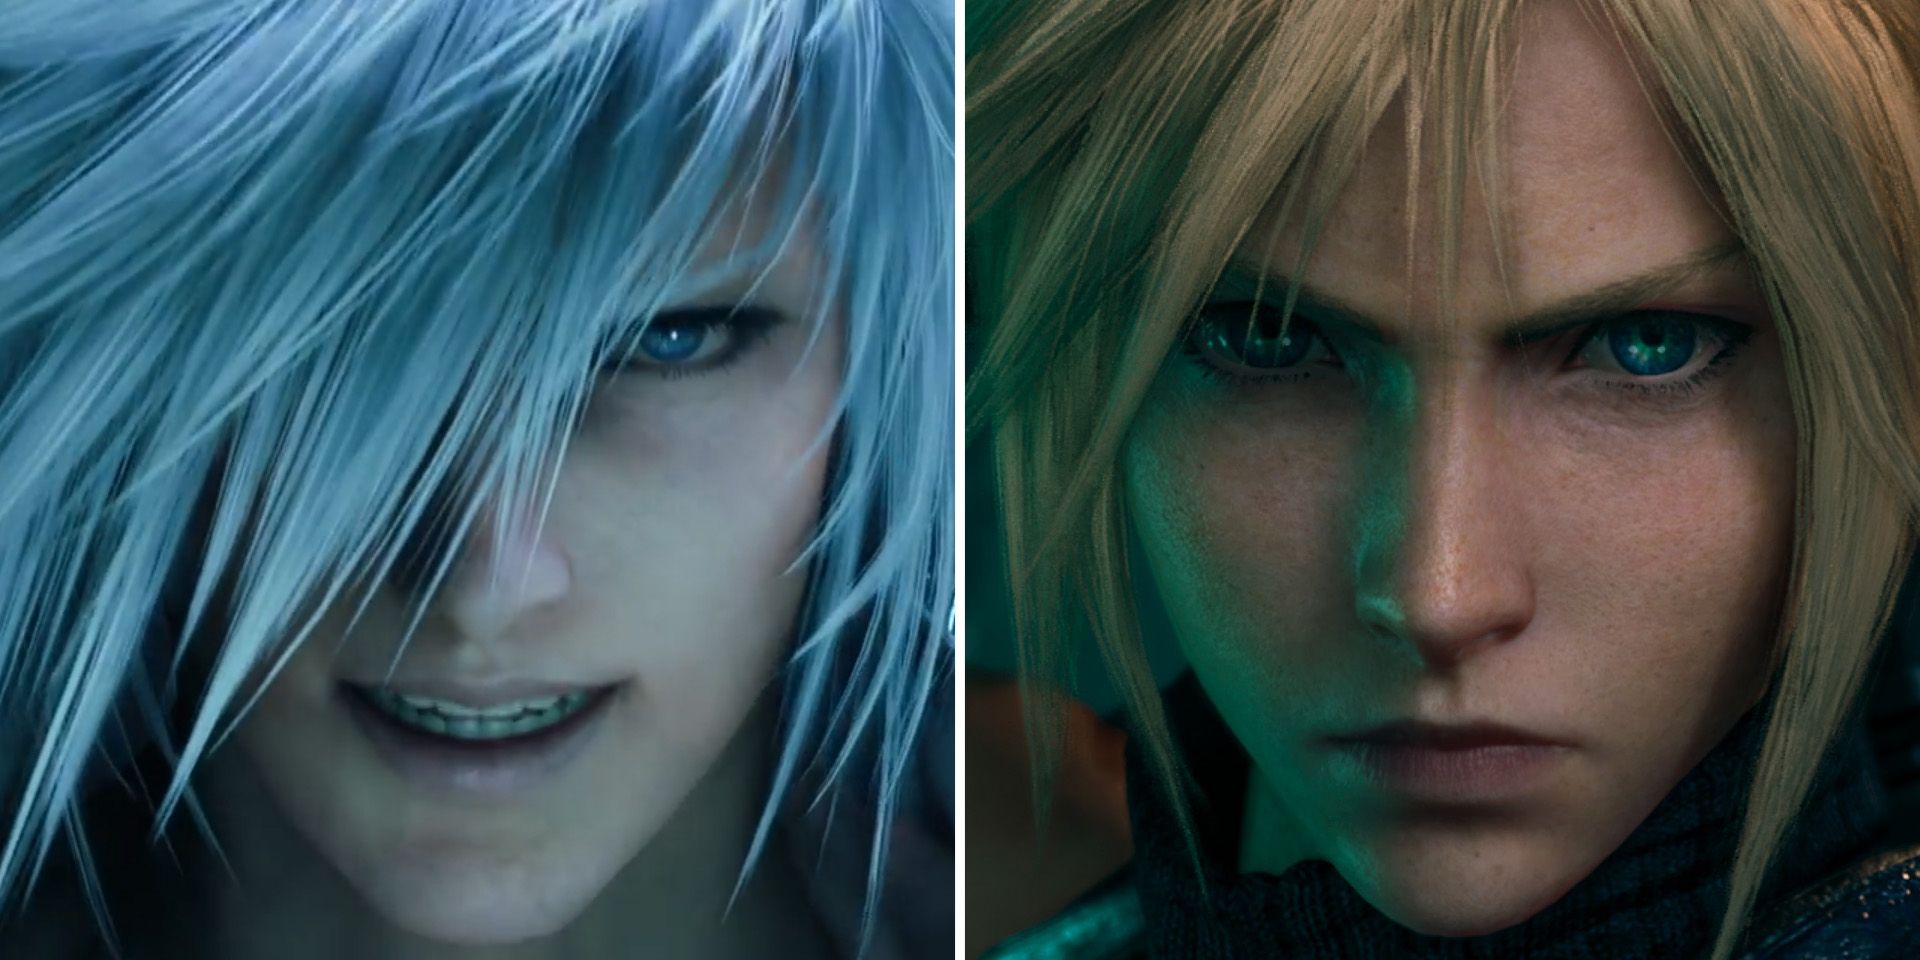 Will Cloud and Weiss do battle in a future episode of Final Fantasy VII Remake?